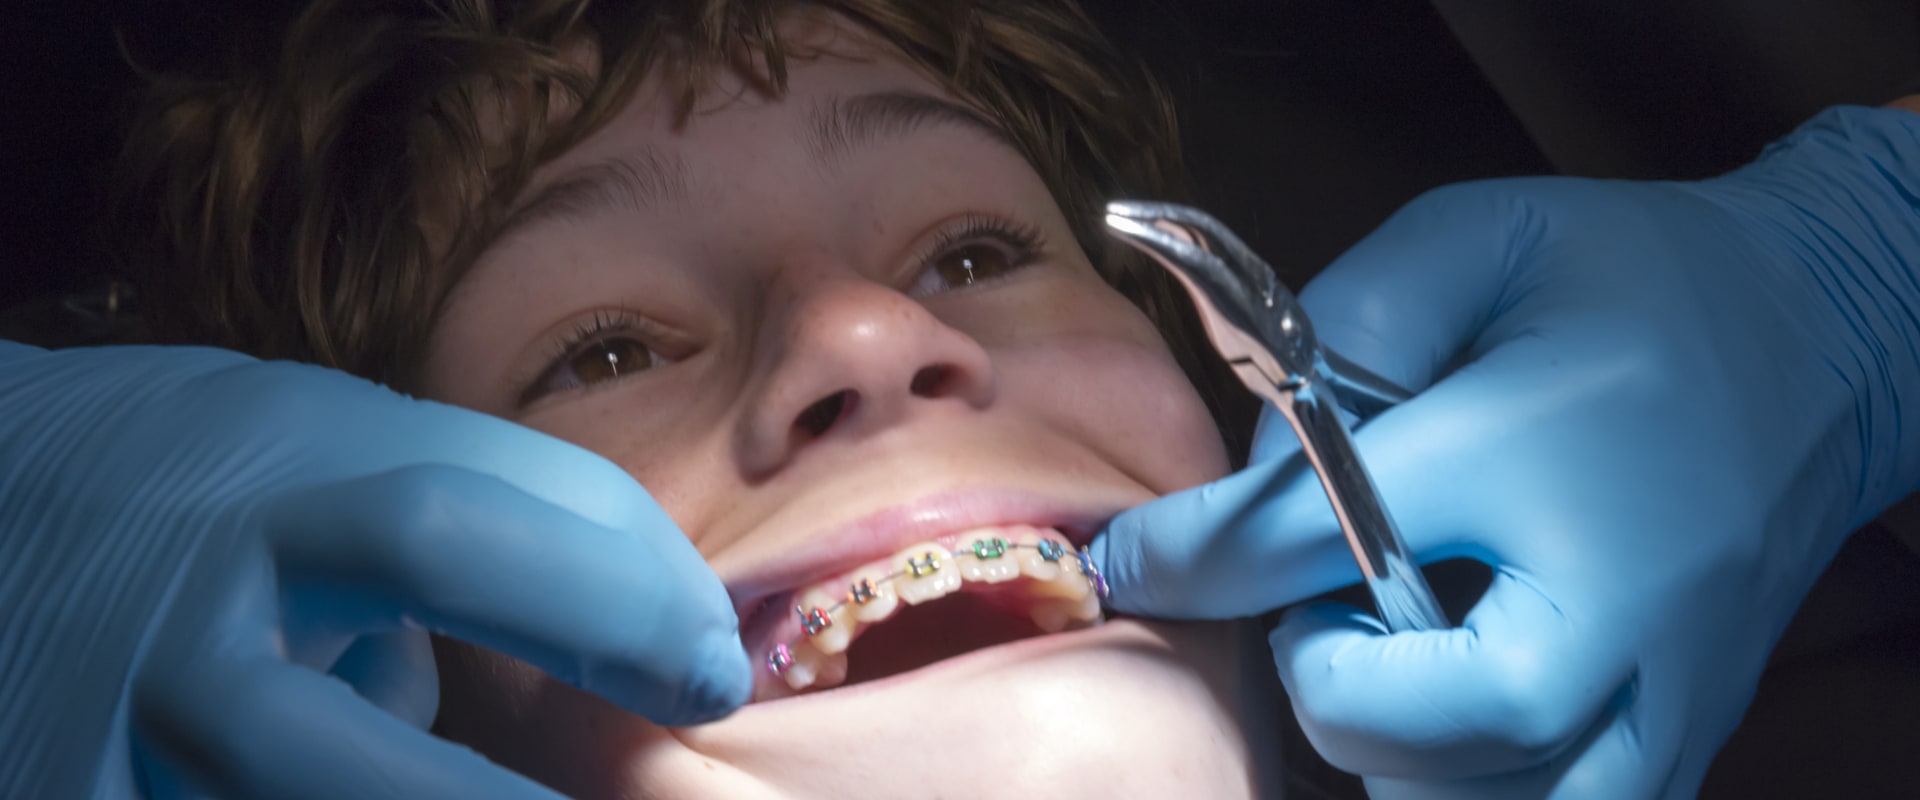 What Degrees Do Orthodontists Need to Pursue?